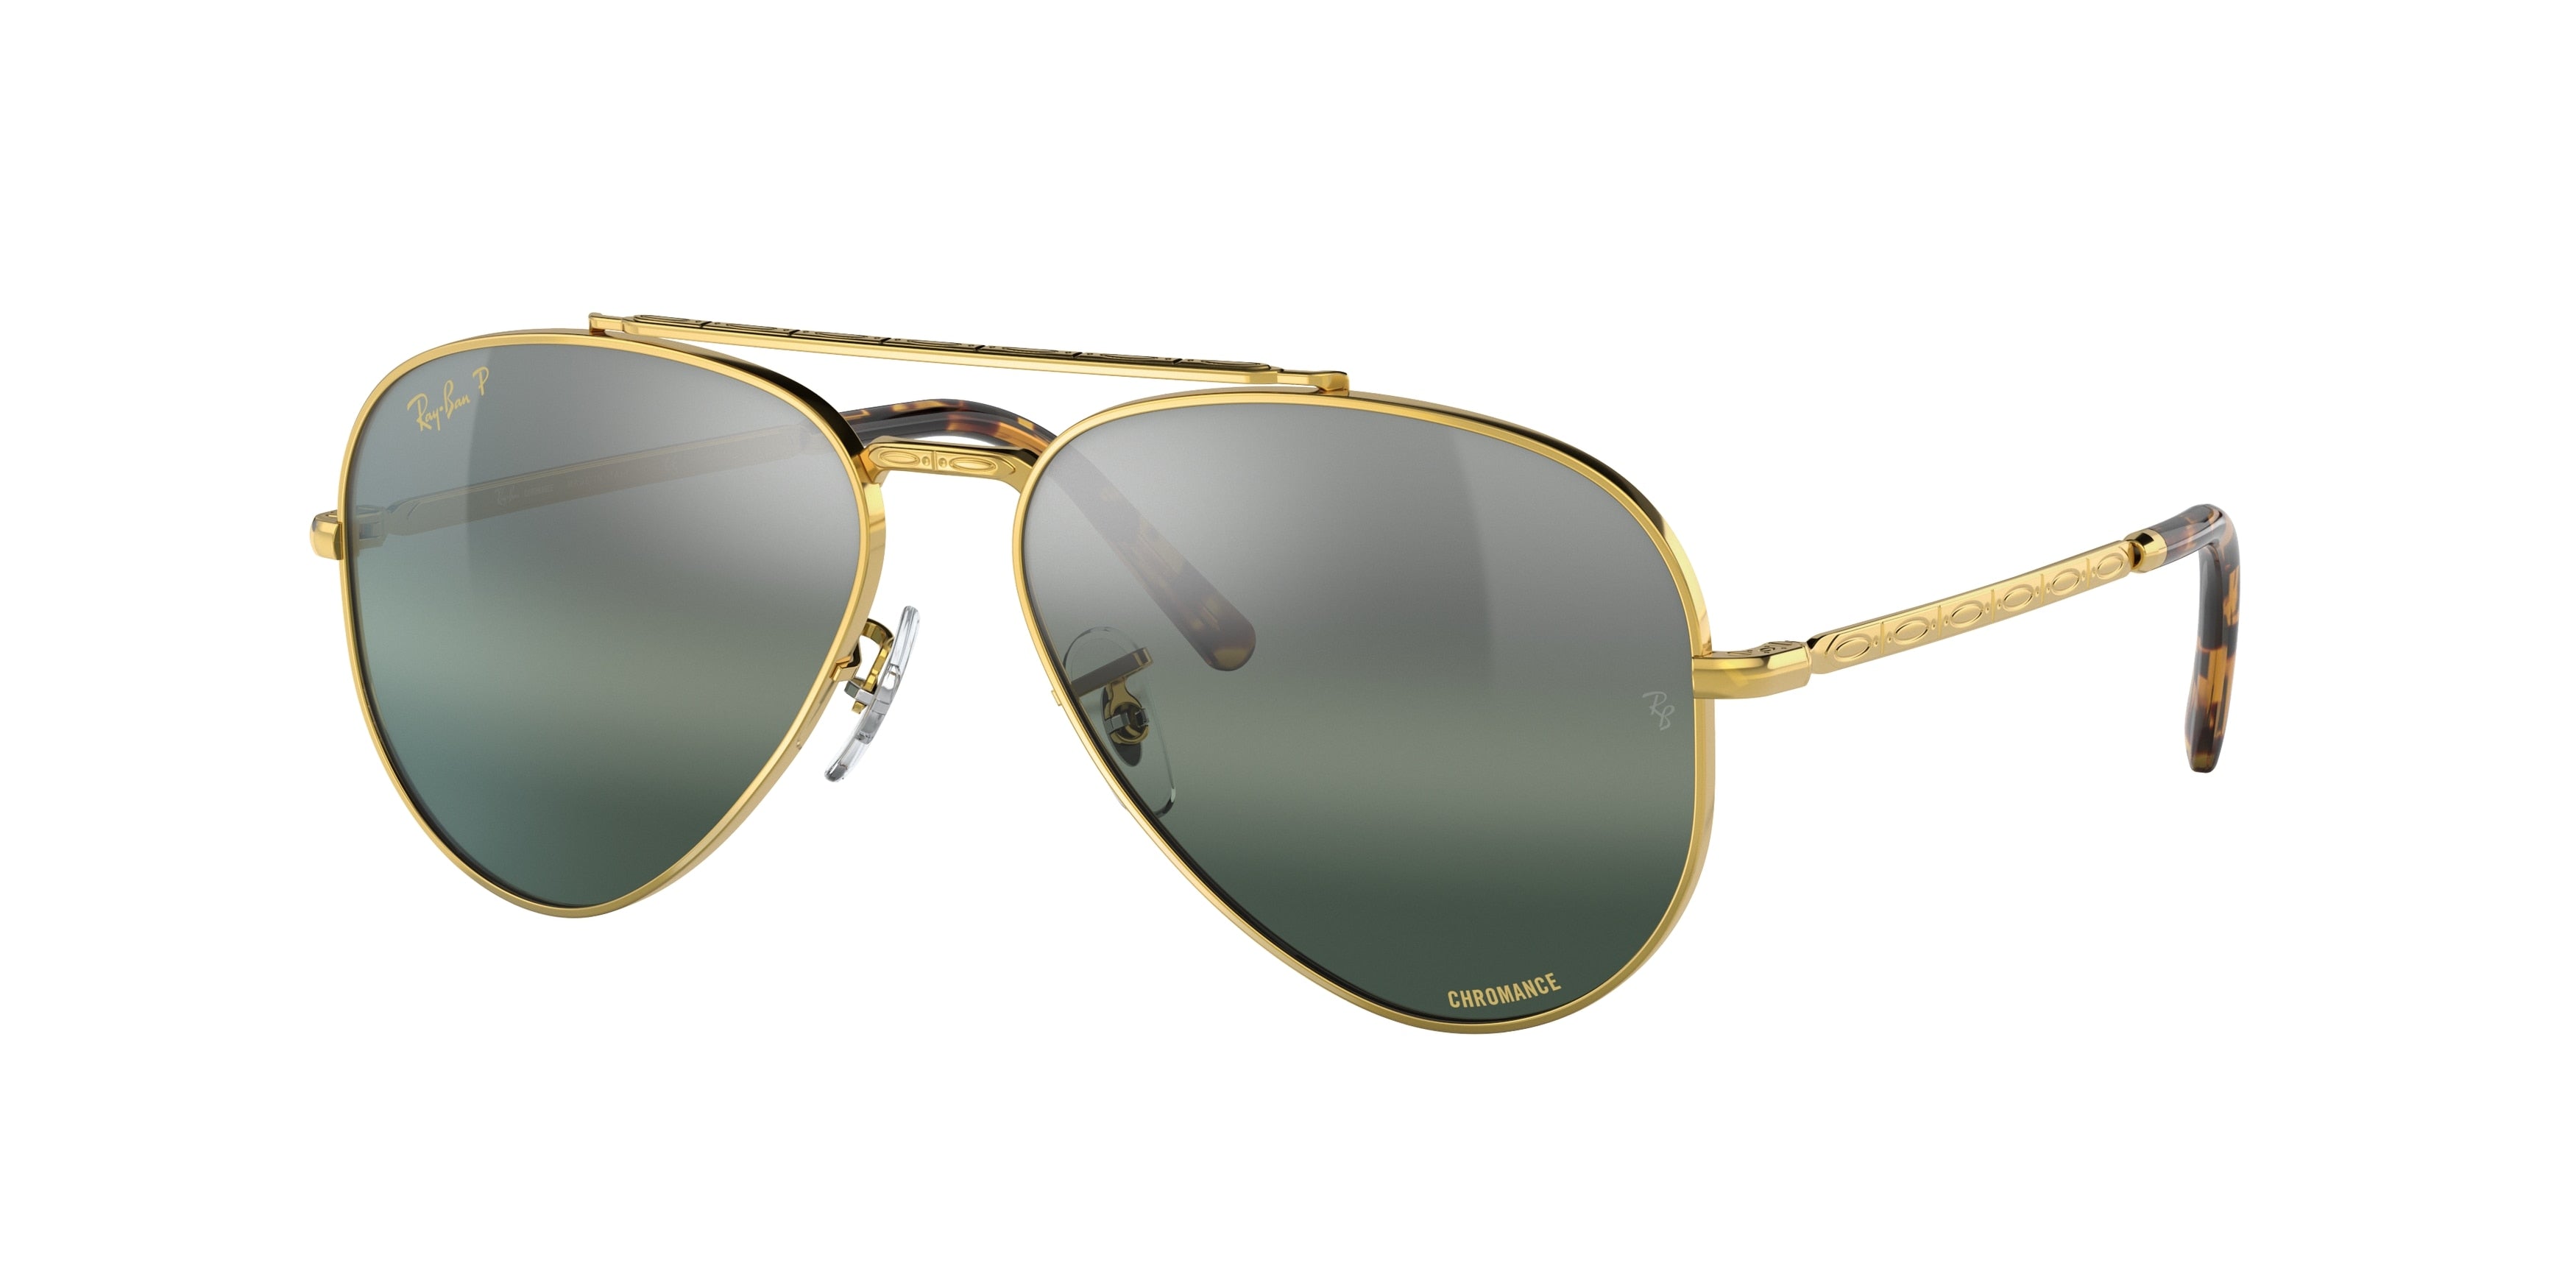 Ray-Ban NEW AVIATOR RB3625 Pilot Sunglasses  9196G6-Gold 61-140-14 - Color Map Gold